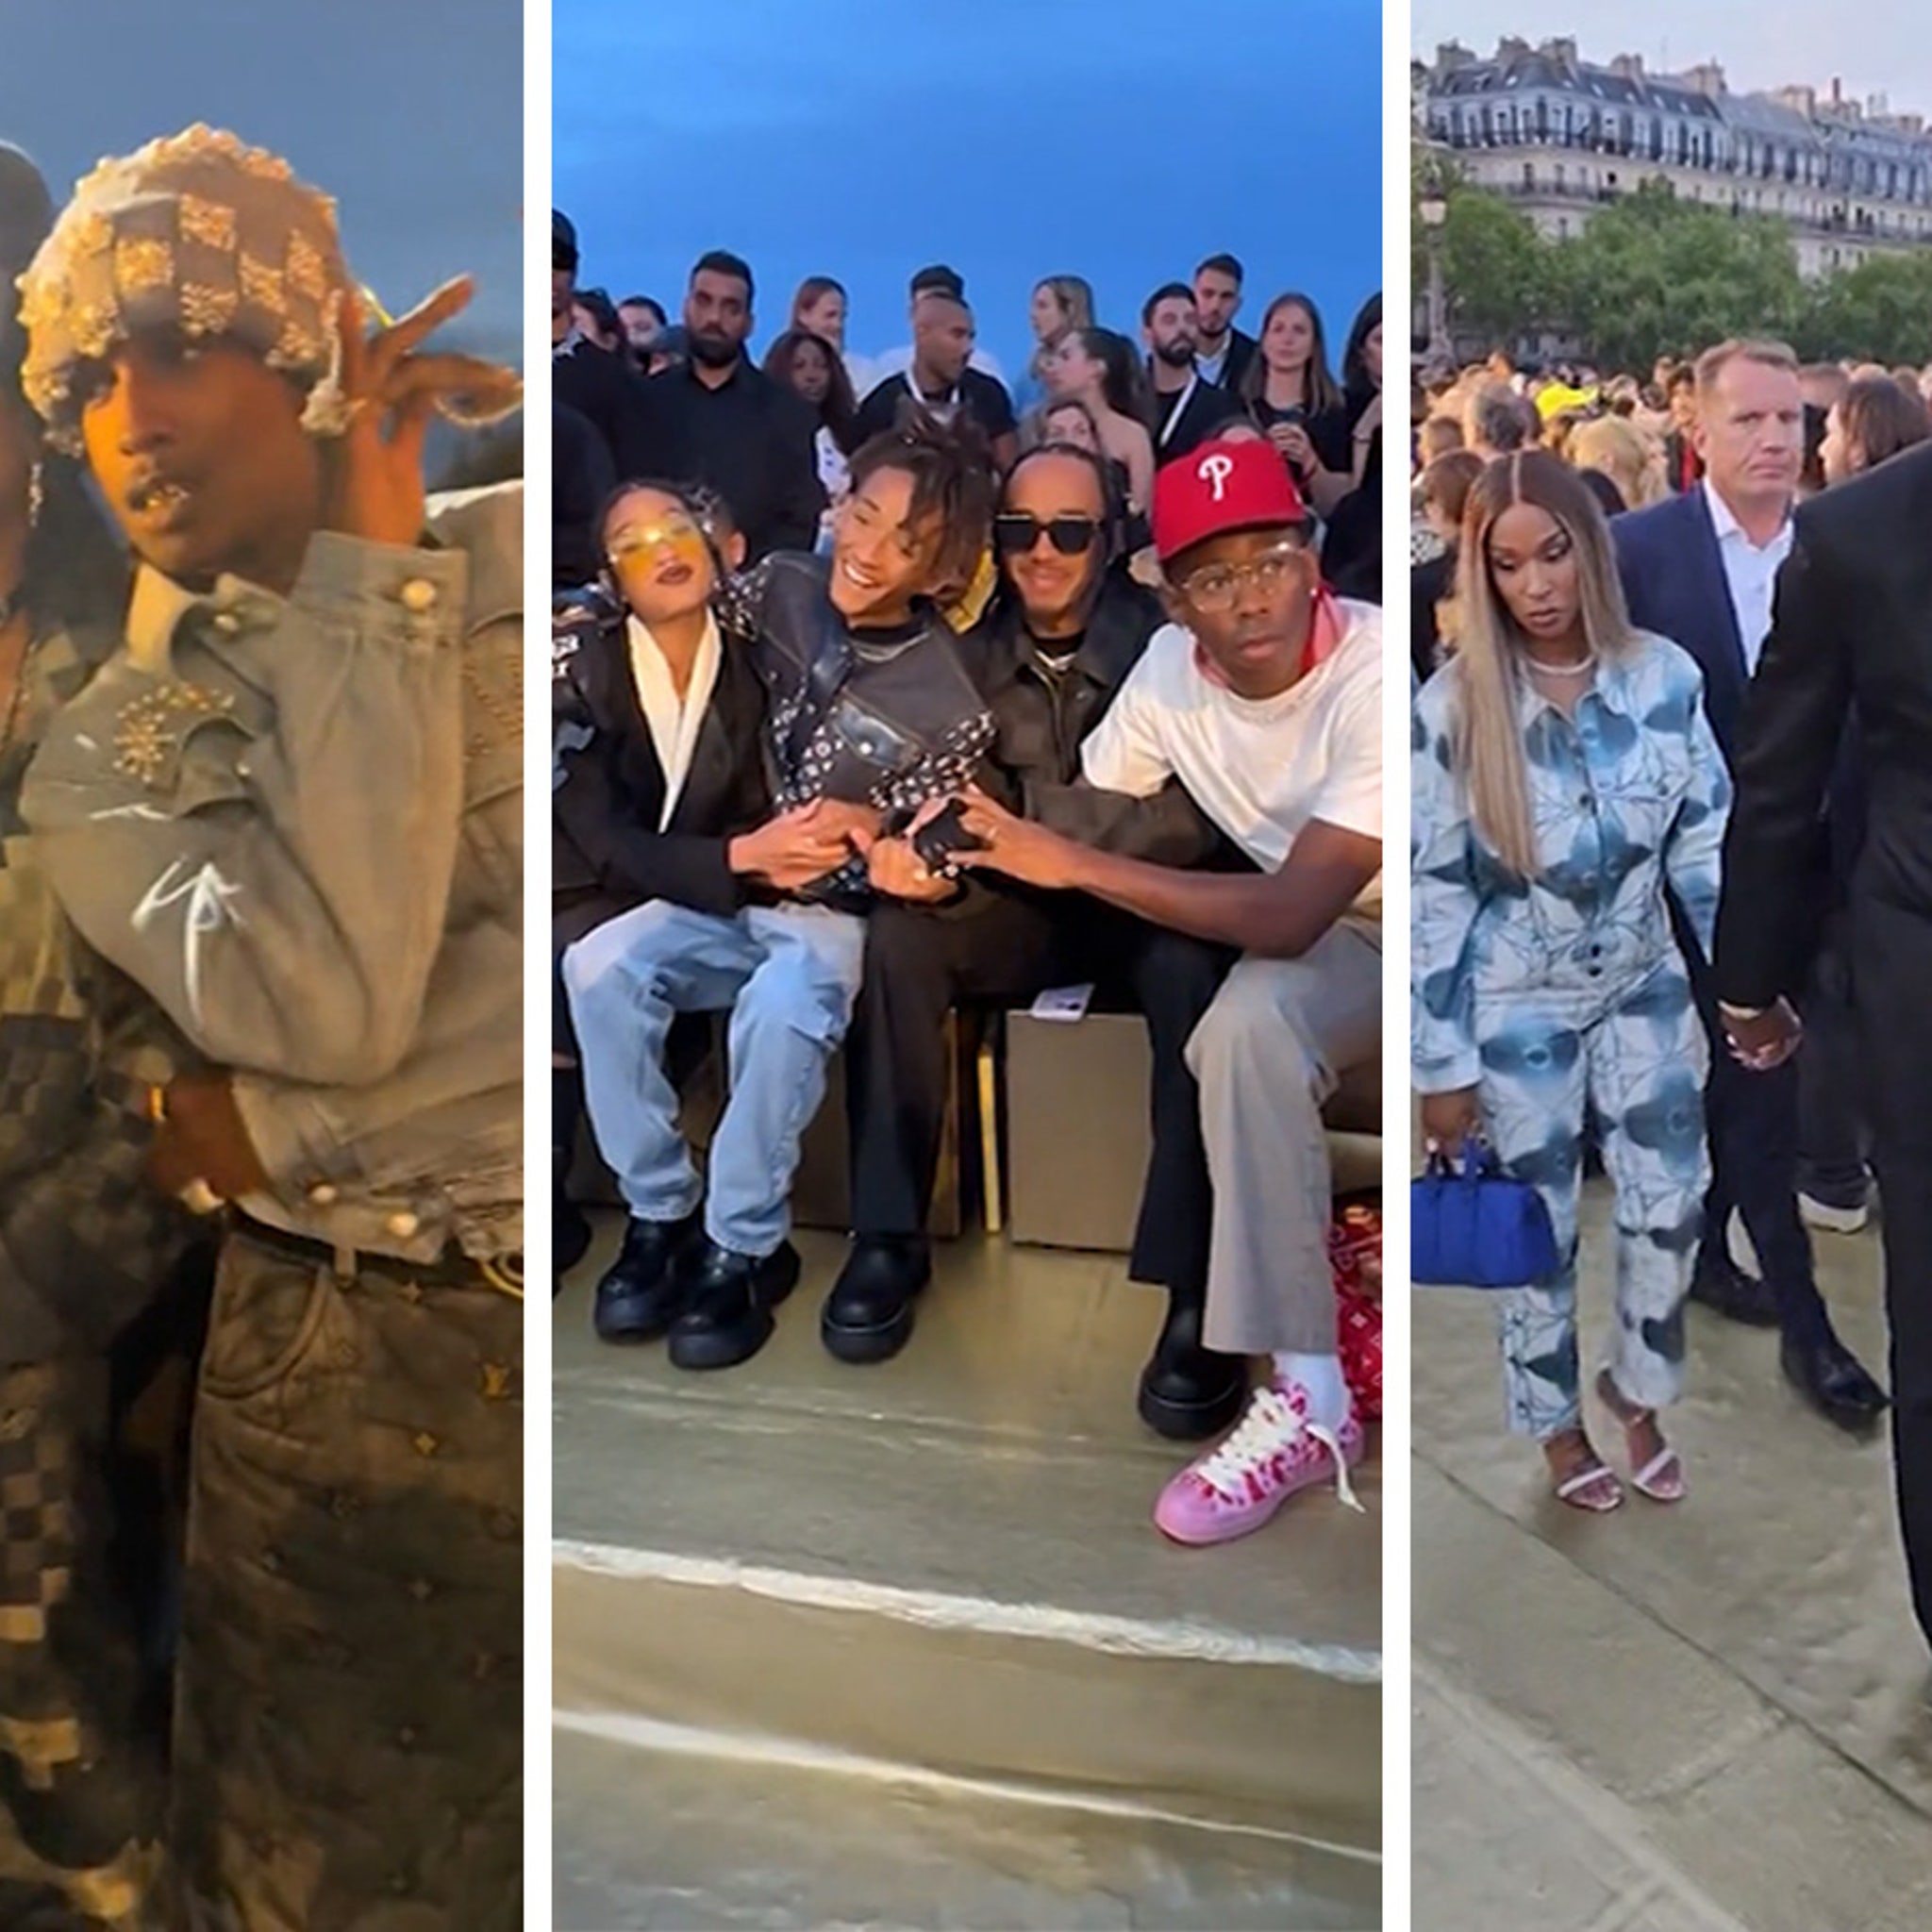 Pharrell Williams' Louis Vuitton Men's Debut Was a Star-Packed